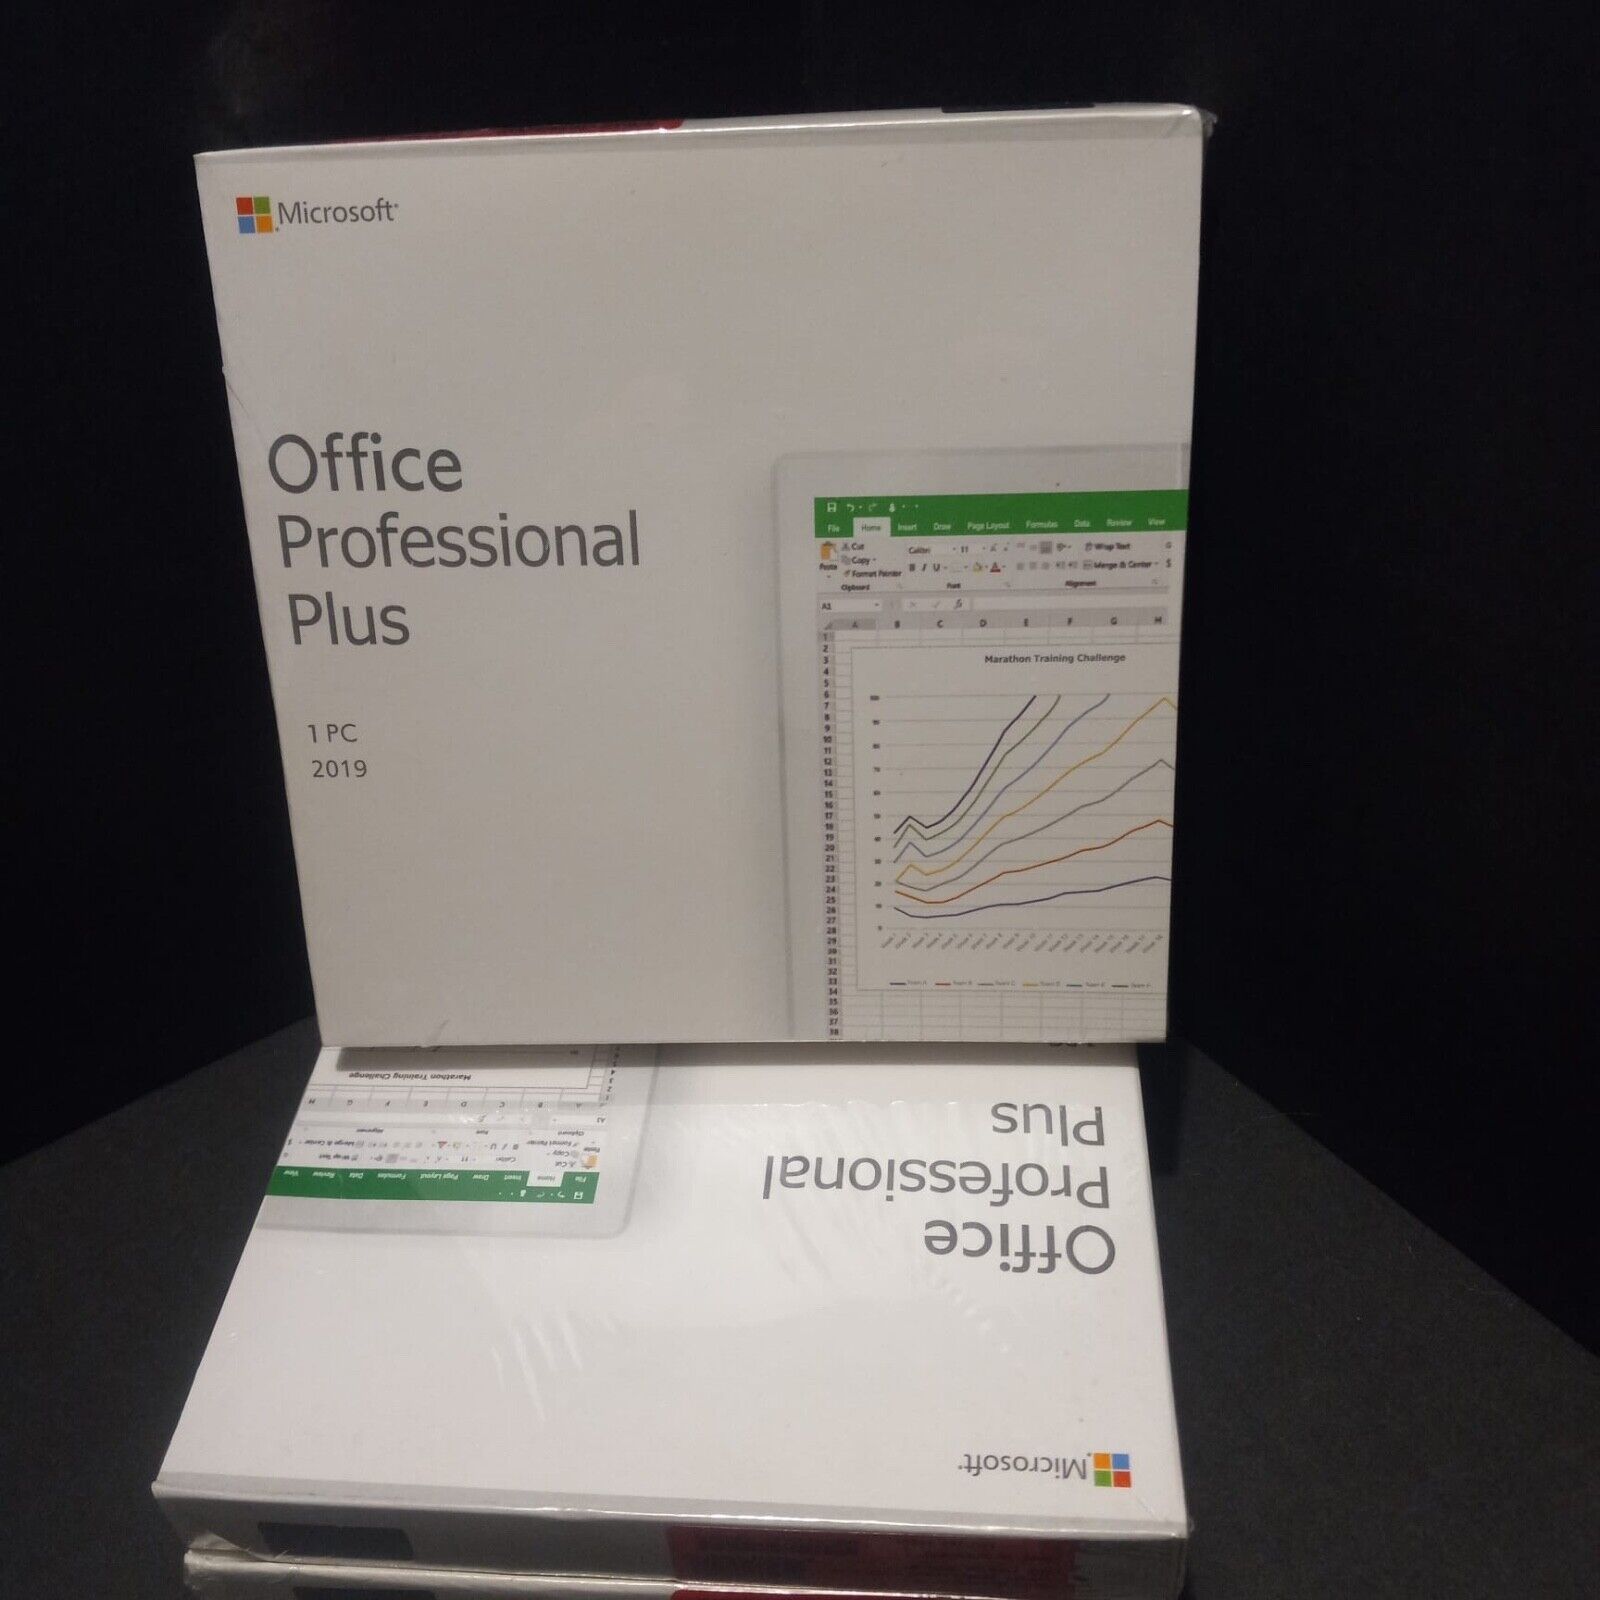 Microsoft Office Professional Plus 2019 1Pc DVD And Sealed Card For Lifetime